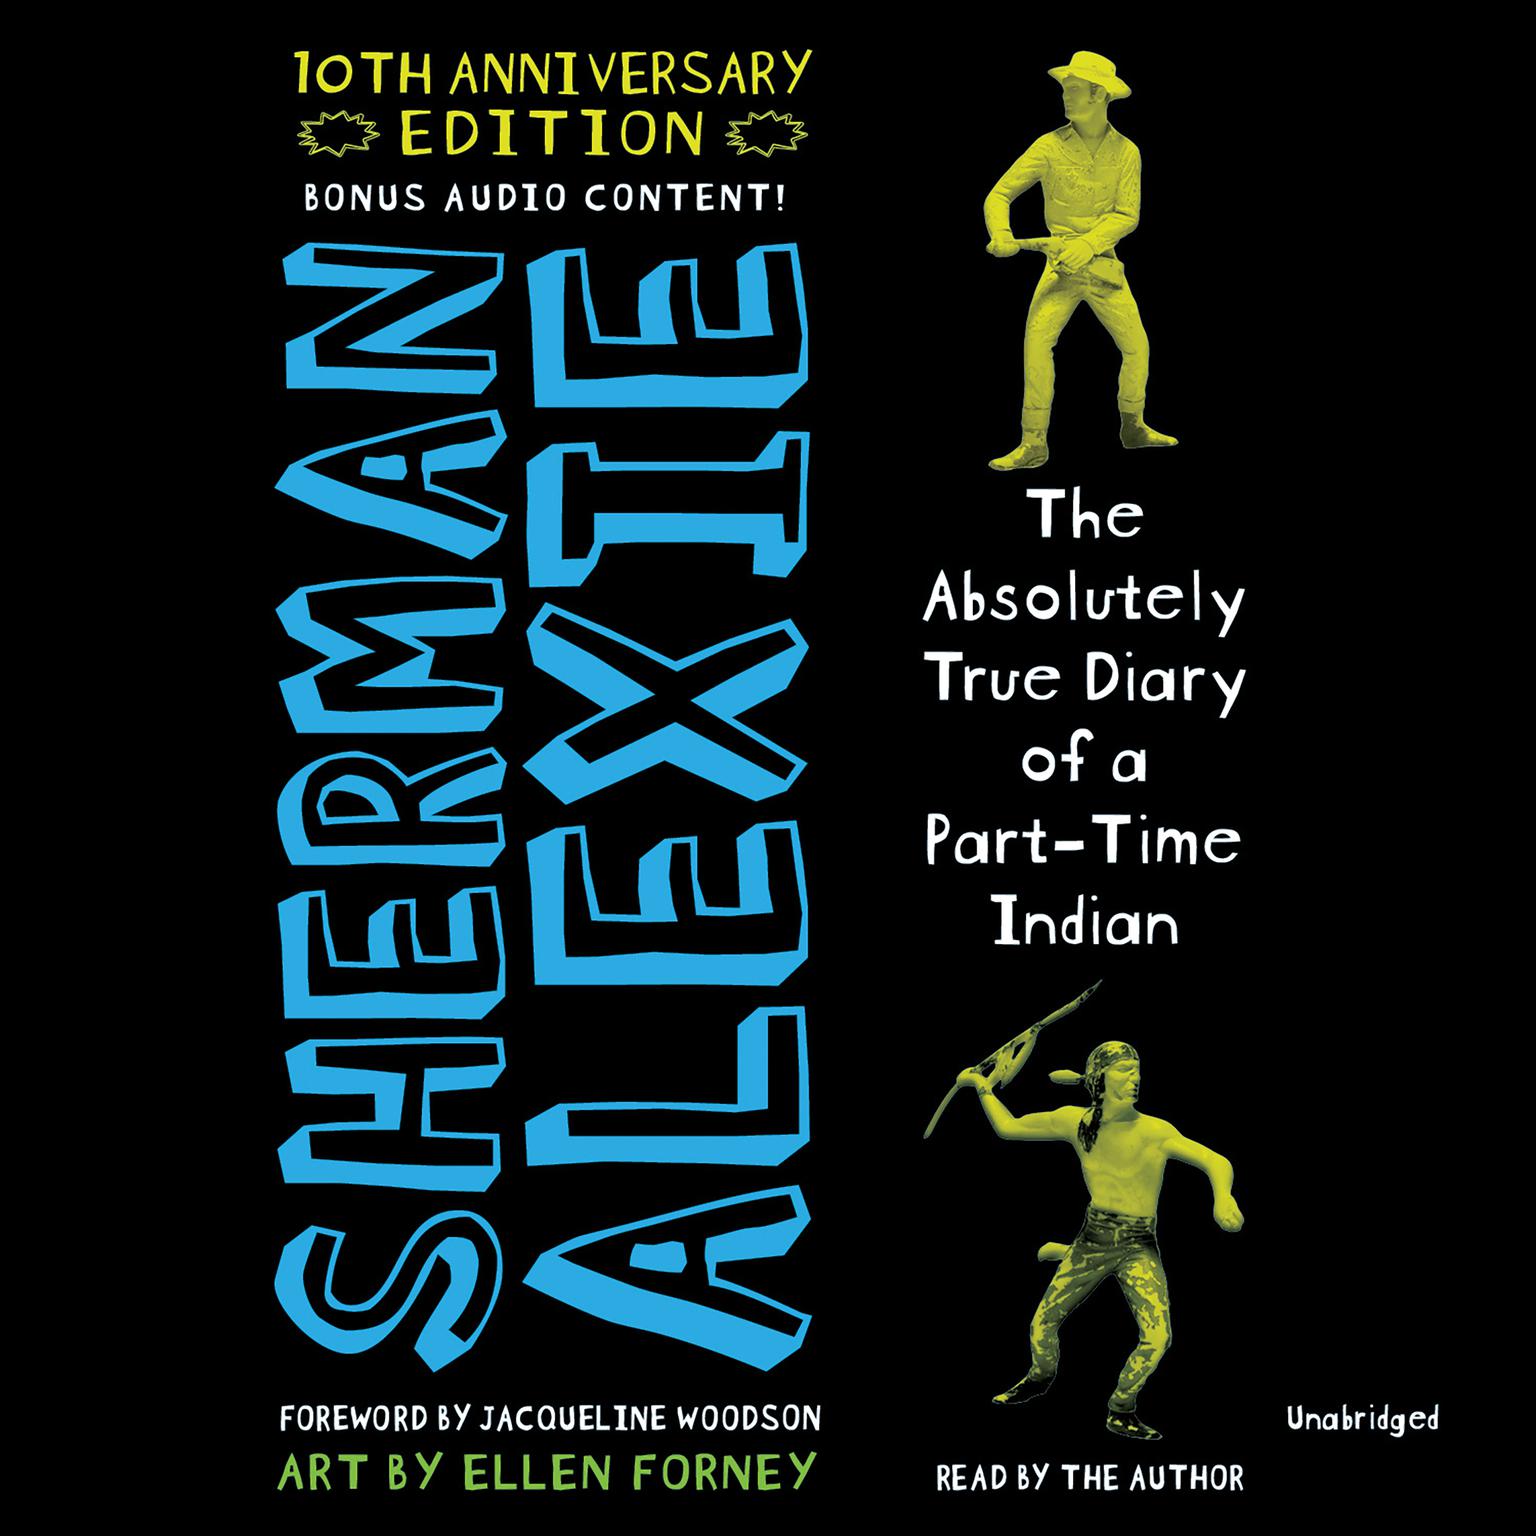 The Absolutely True Diary of a Part-Time Indian (10th Anniversary Edition) Audiobook, by Sherman Alexie